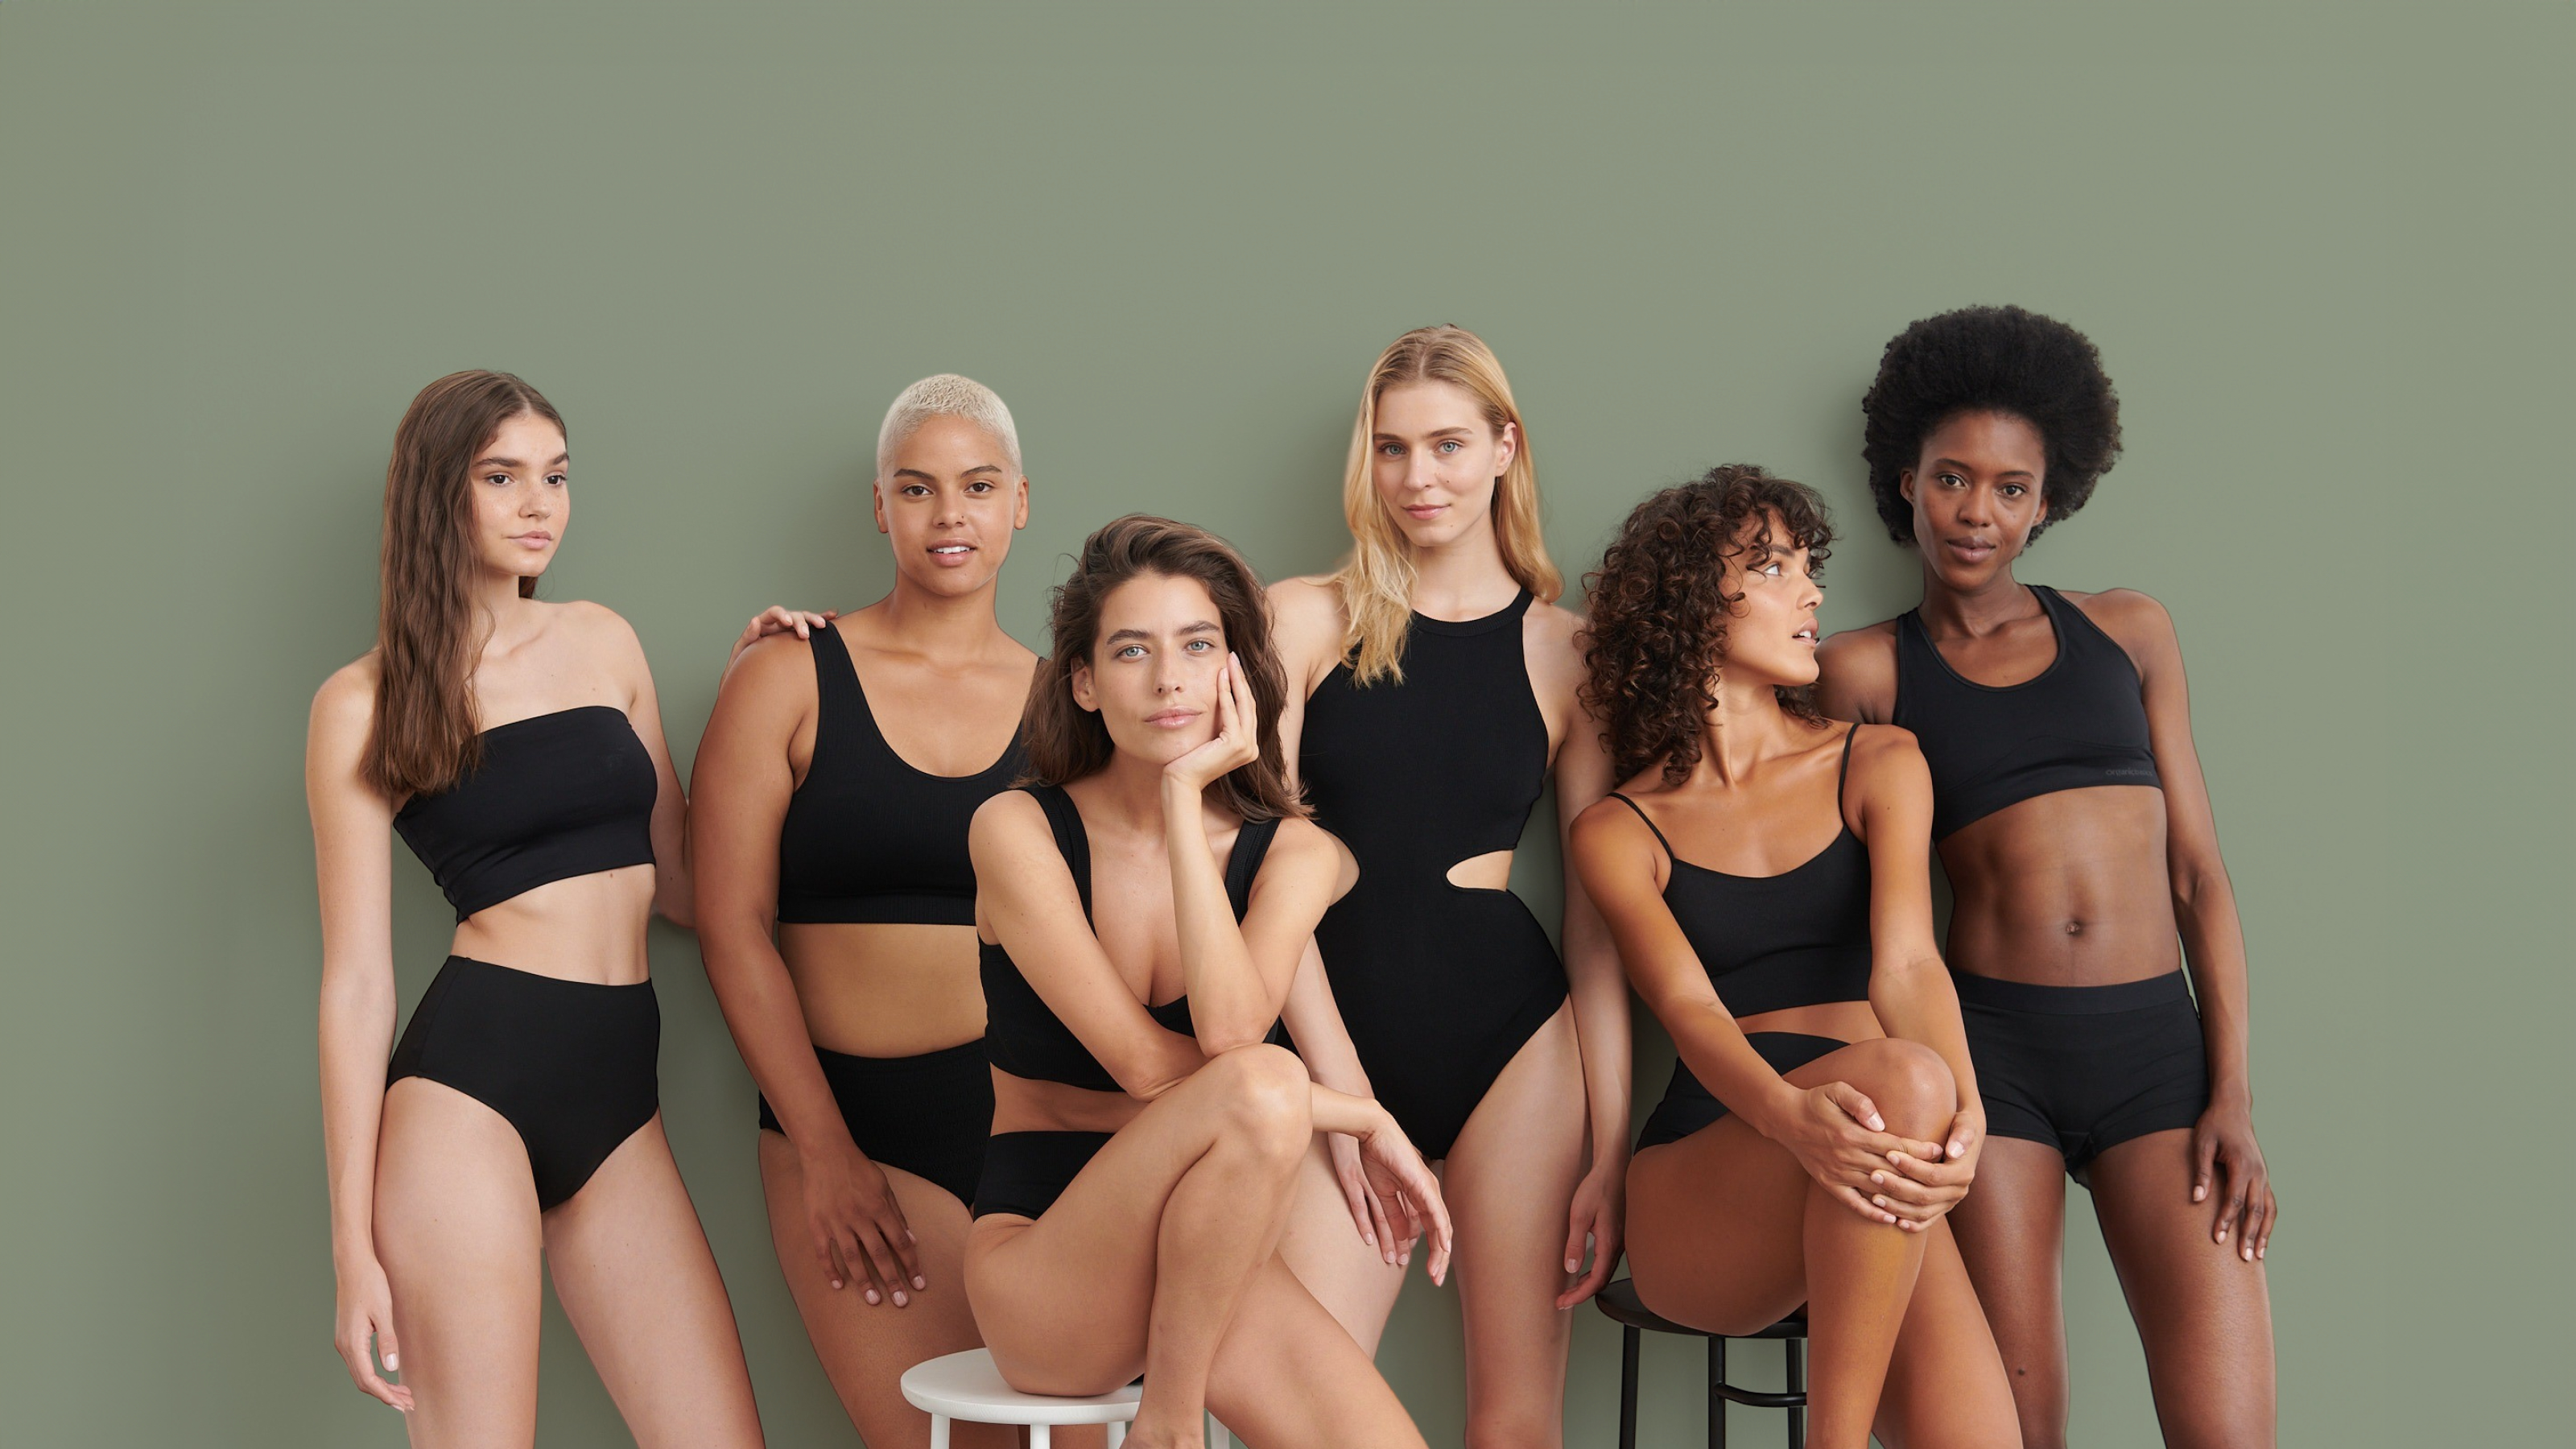 Group of 6 women in black sporty bikinis sitting and standing.